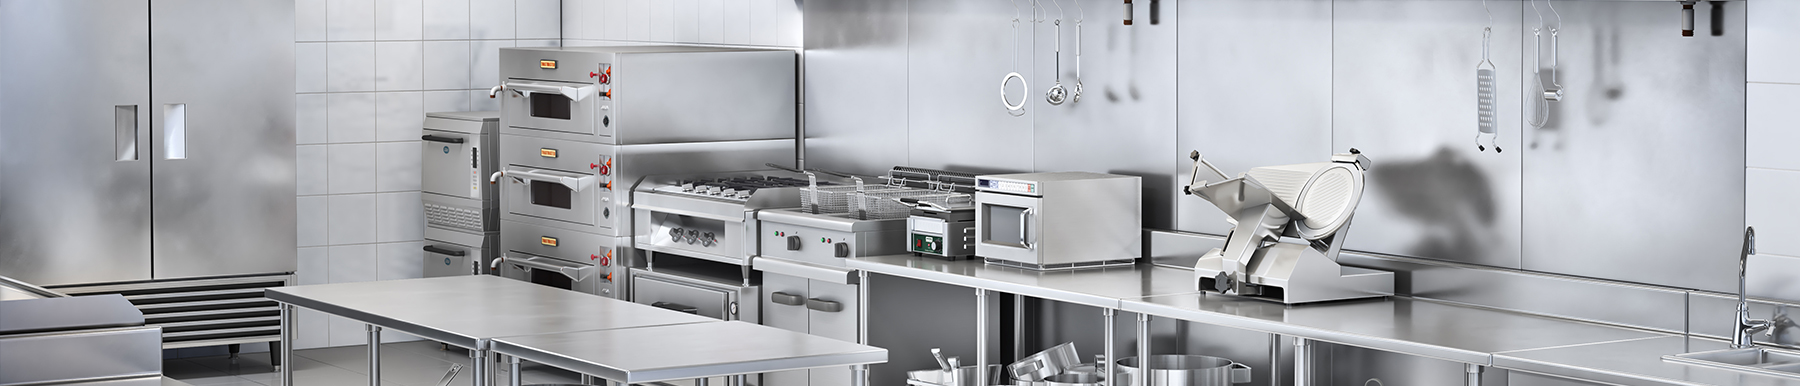 Catering Equipment Suppliers Near Scarborough | H2 Catering Equipment Catering Equipment